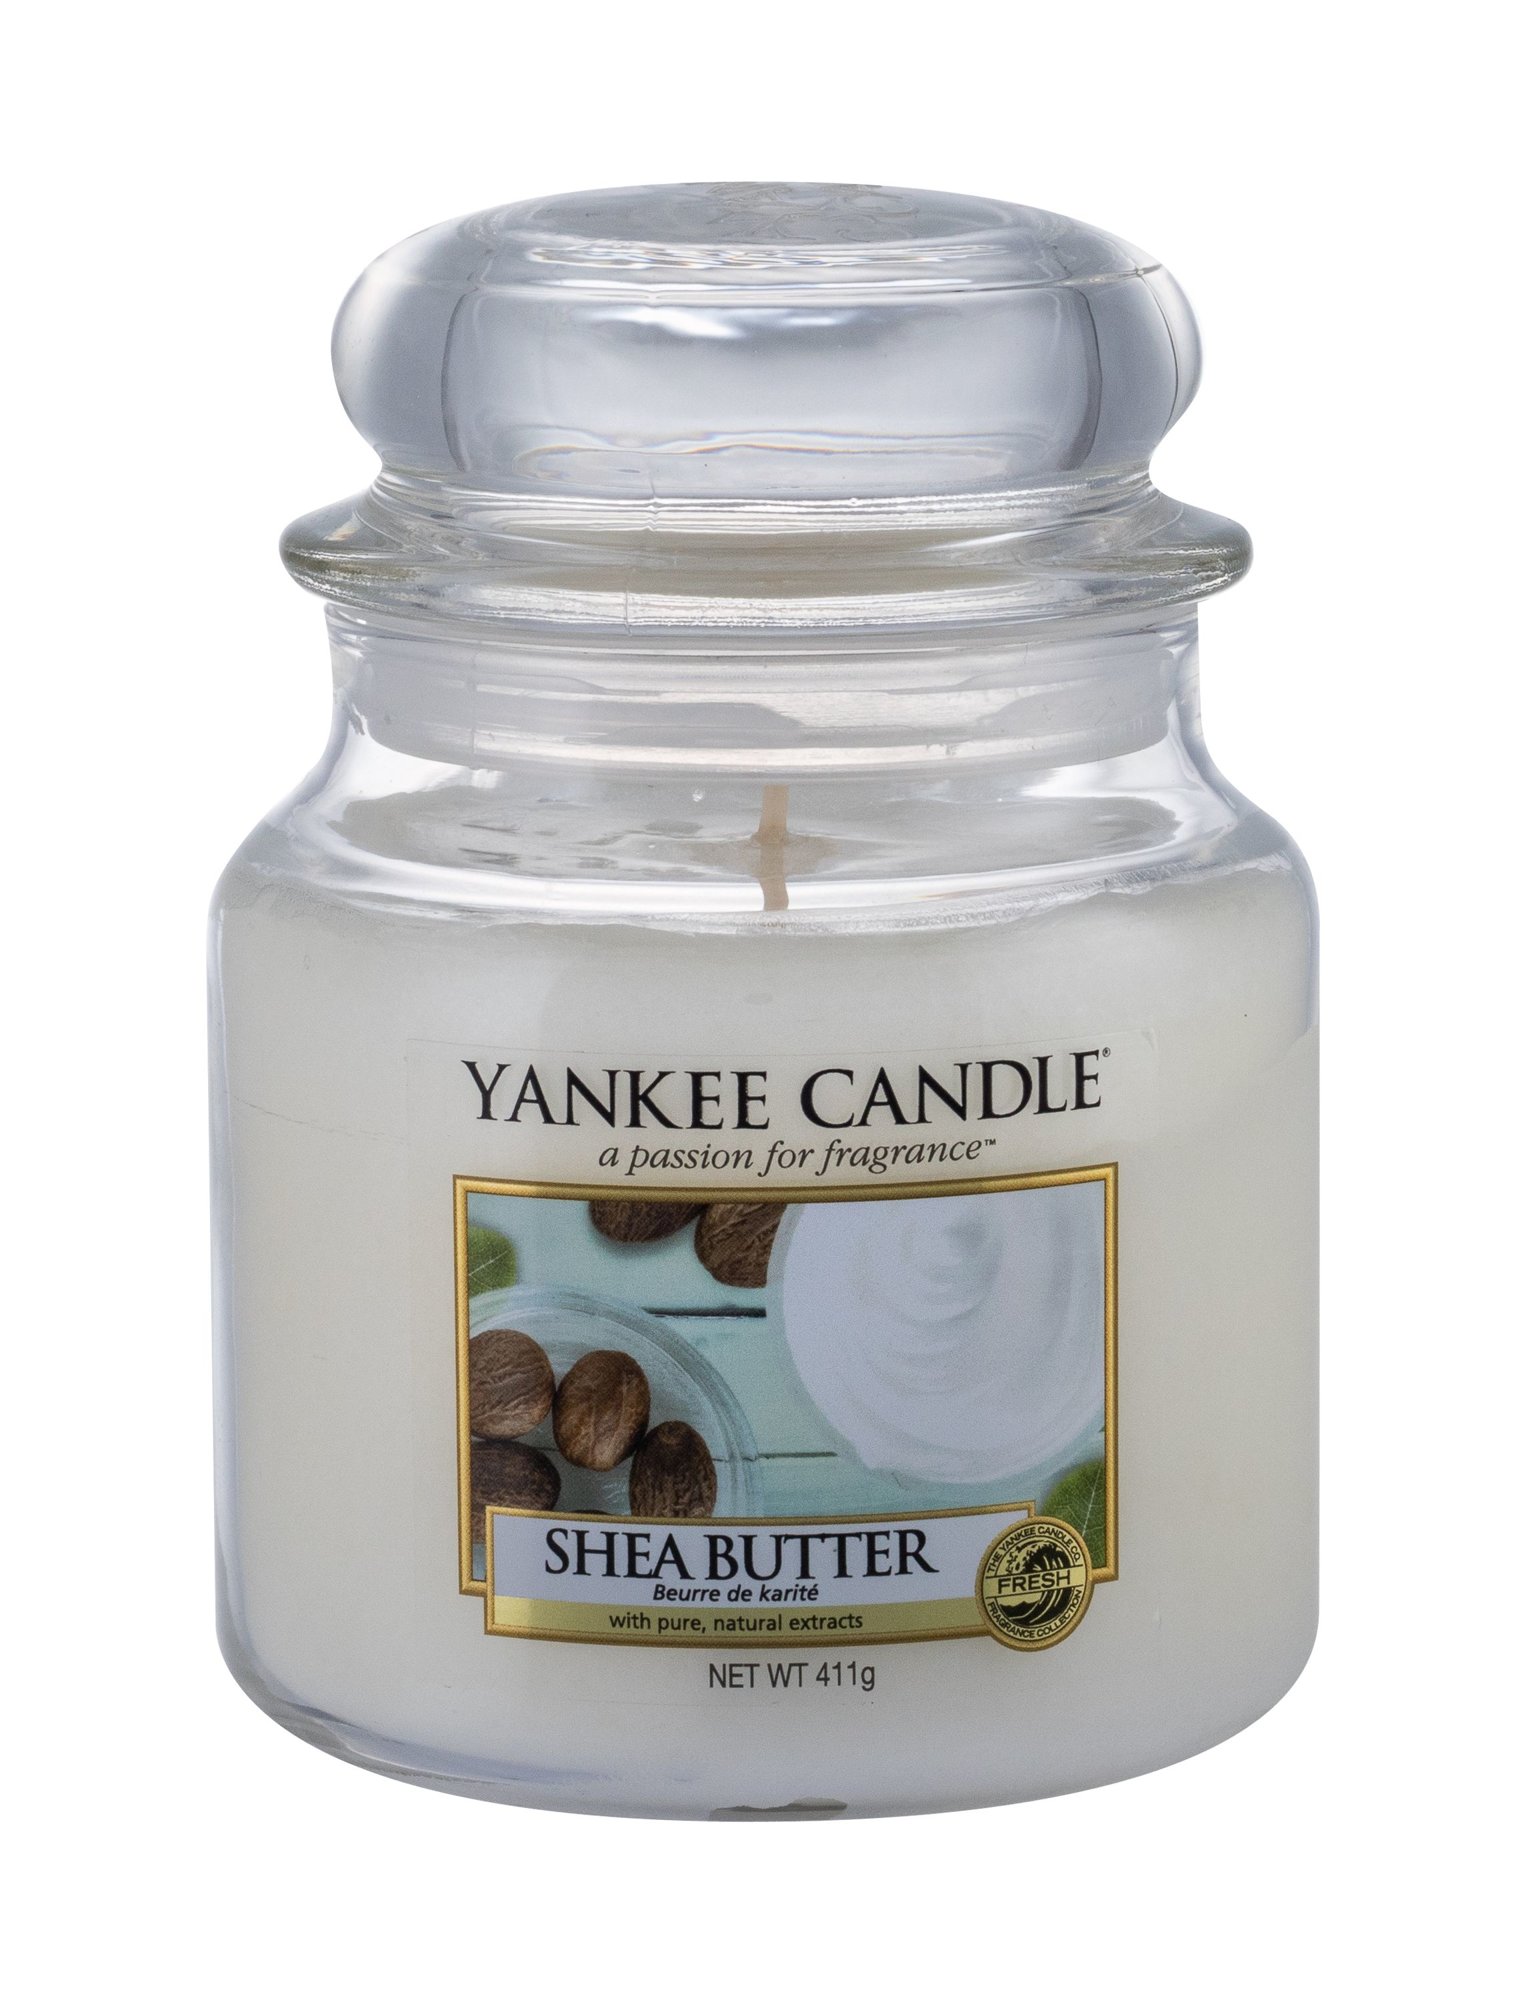 Yankee Candle Shea Butter 411g Kvepalai Unisex Scented Candle